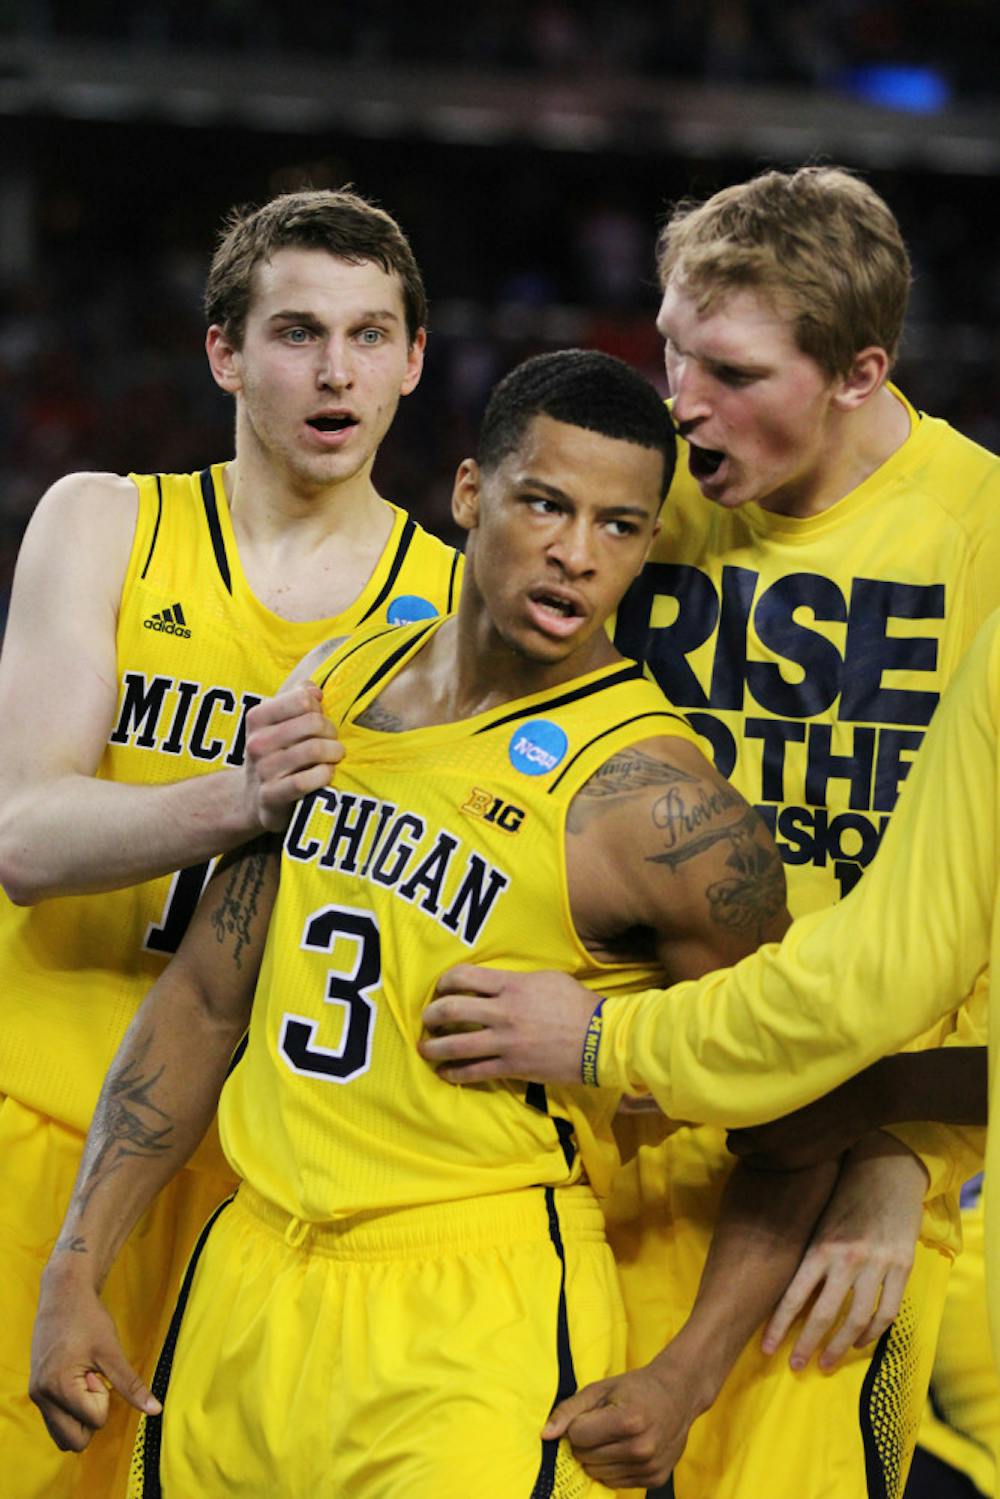 <p class="p1"><span class="s1">Guard Trey Burke (3) celebrates with his teammates during Michigan’s 87-85 overtime win against Kansas on March 29 in Arlington, Texas.</span></p>